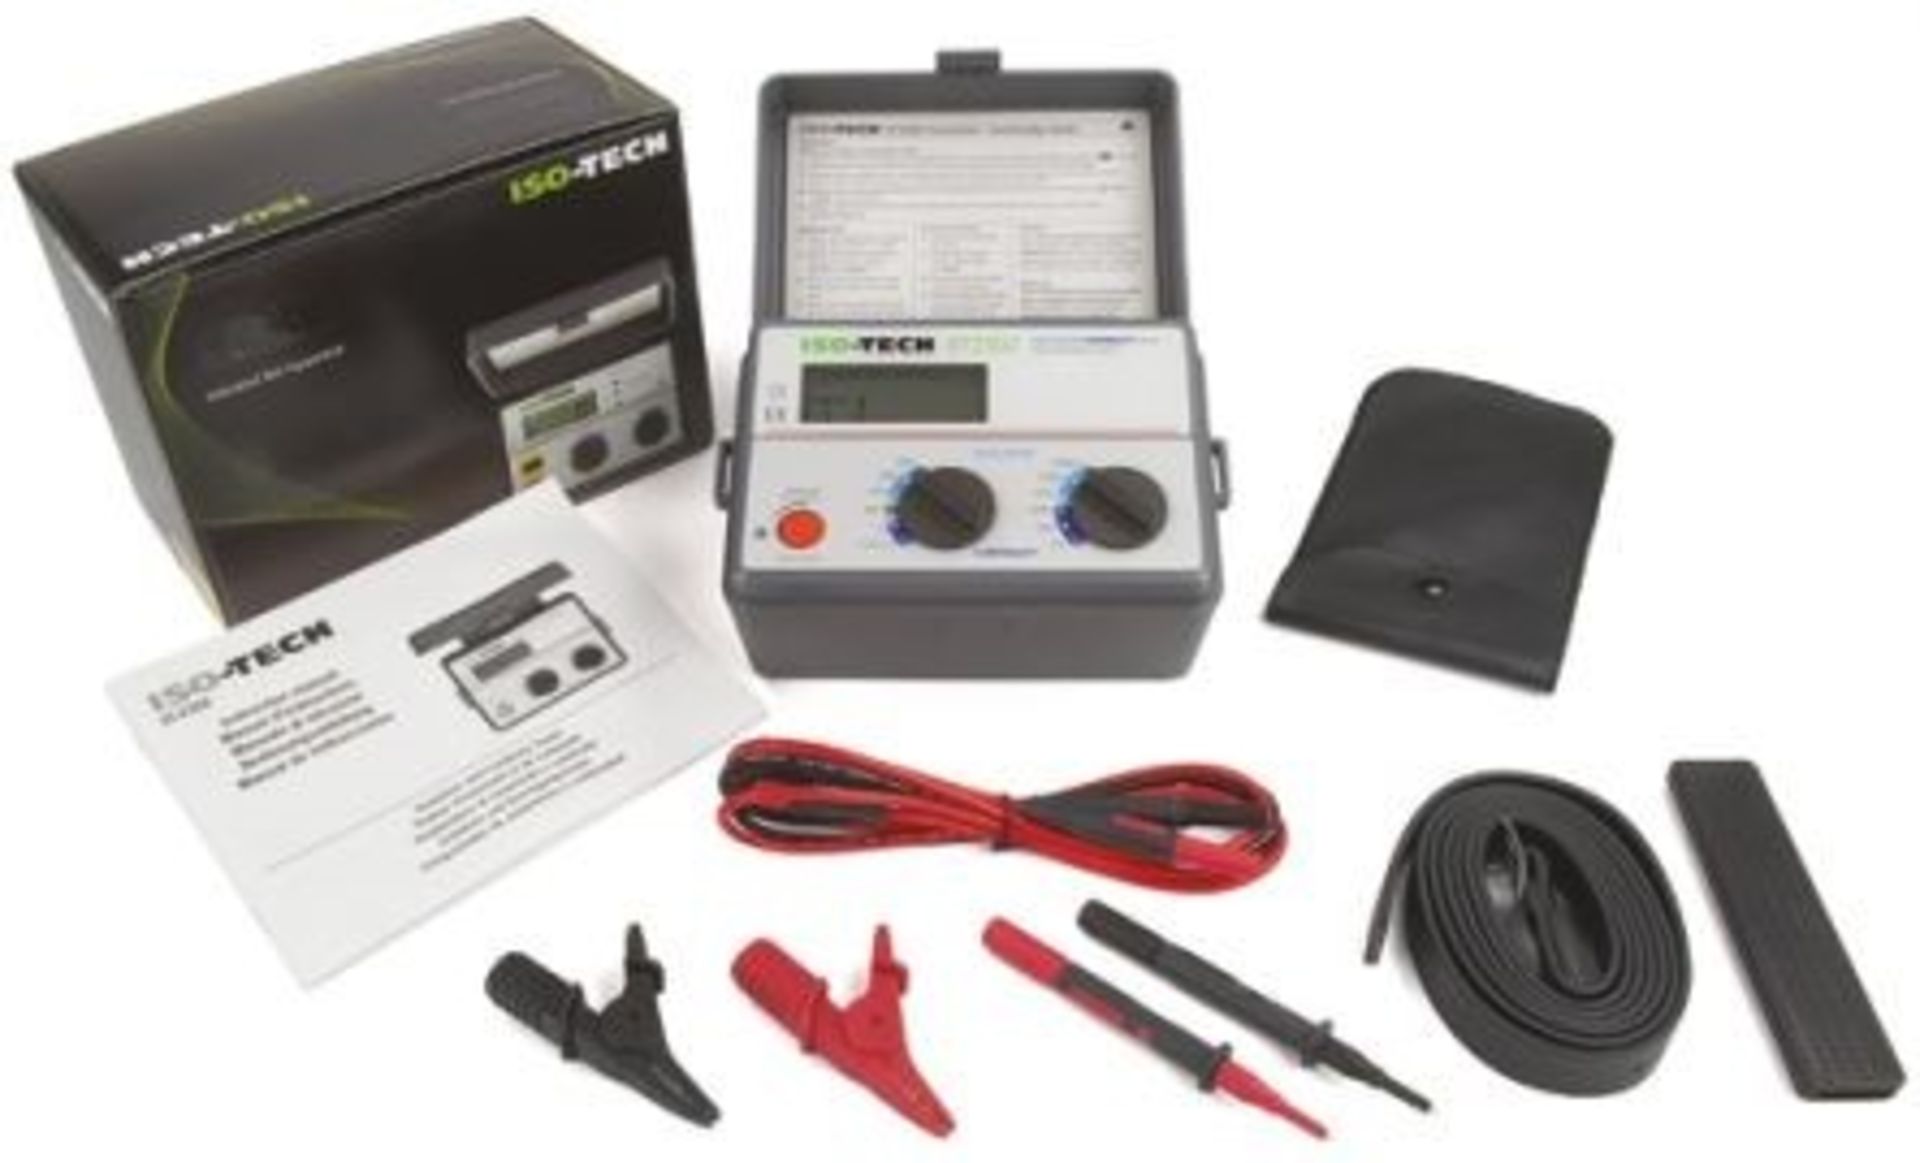 ISO-TECH IIT2302 Digital Insulation / Continuity Tester 200MΩ CAT III 300V - Image 2 of 3